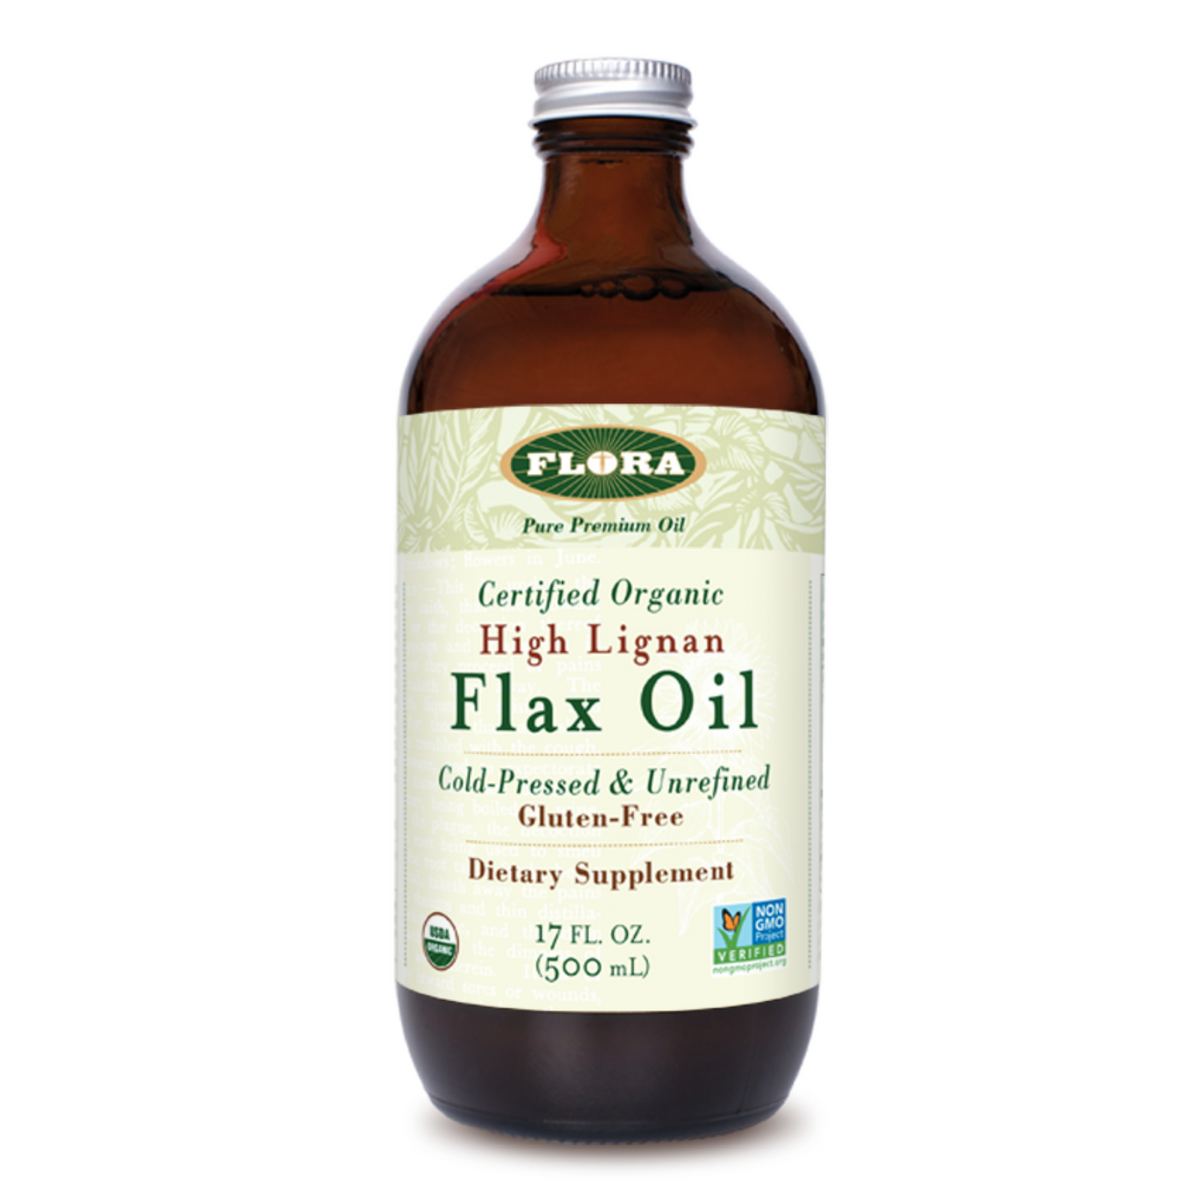 Primary Image of High Lignan Flax Oil